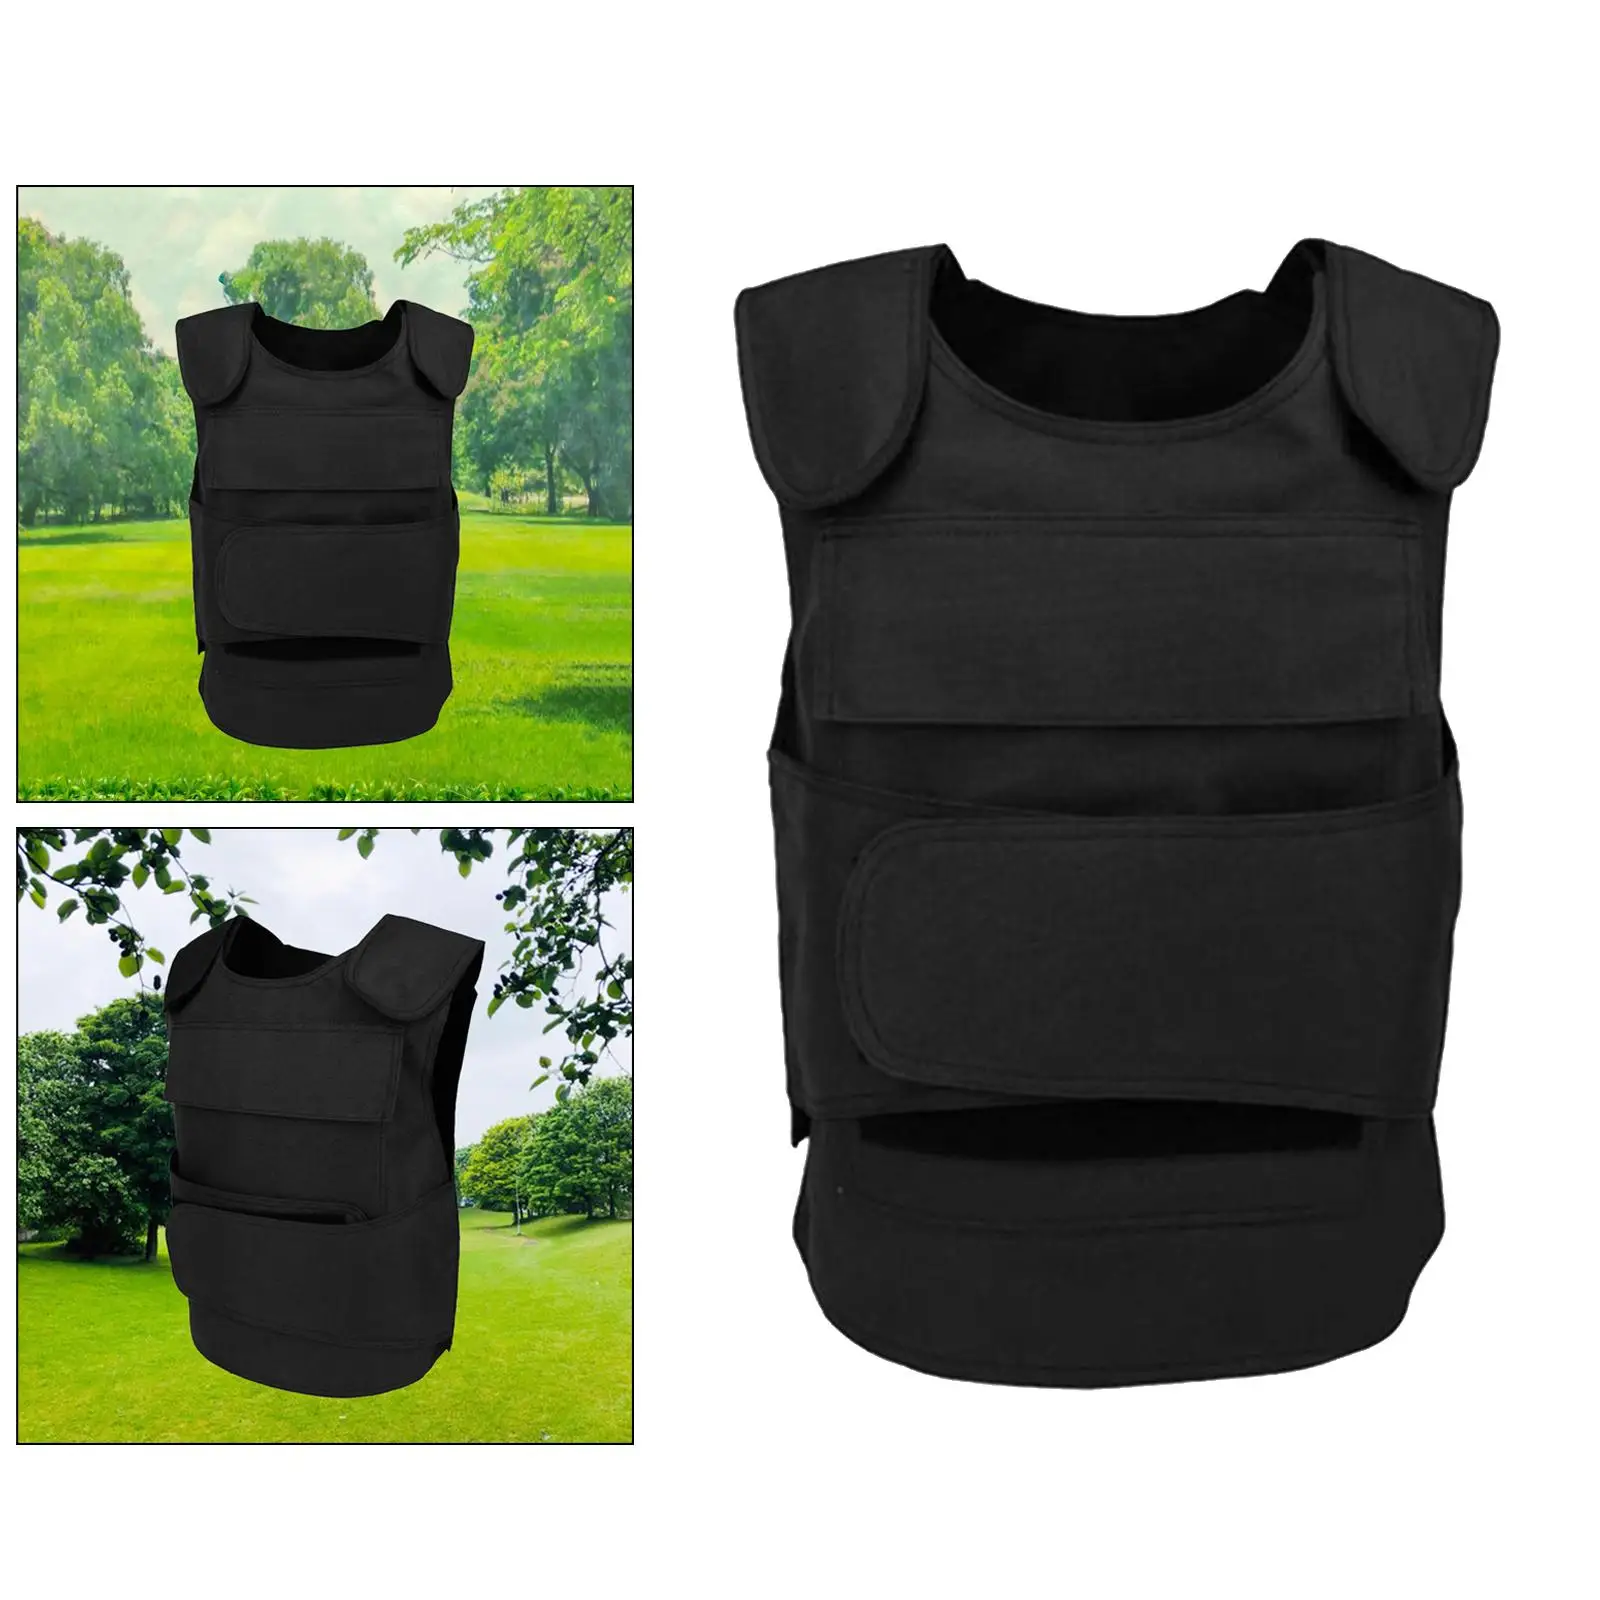 Utility Tactical Vest -Light  Game Training Vests for Adults